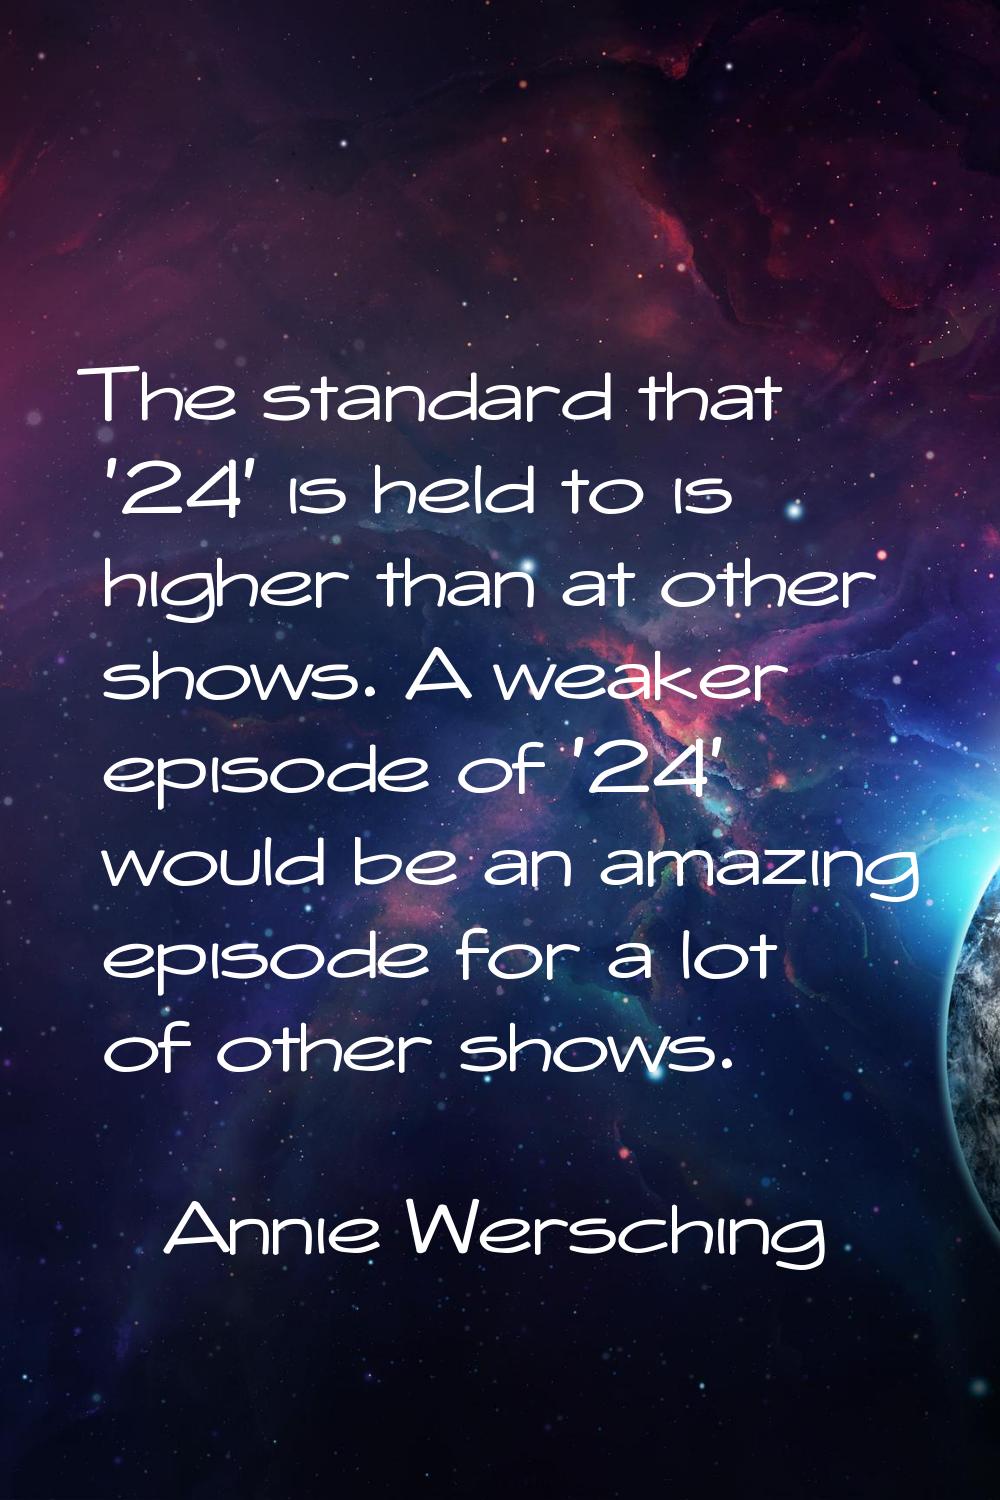 The standard that '24' is held to is higher than at other shows. A weaker episode of '24' would be 